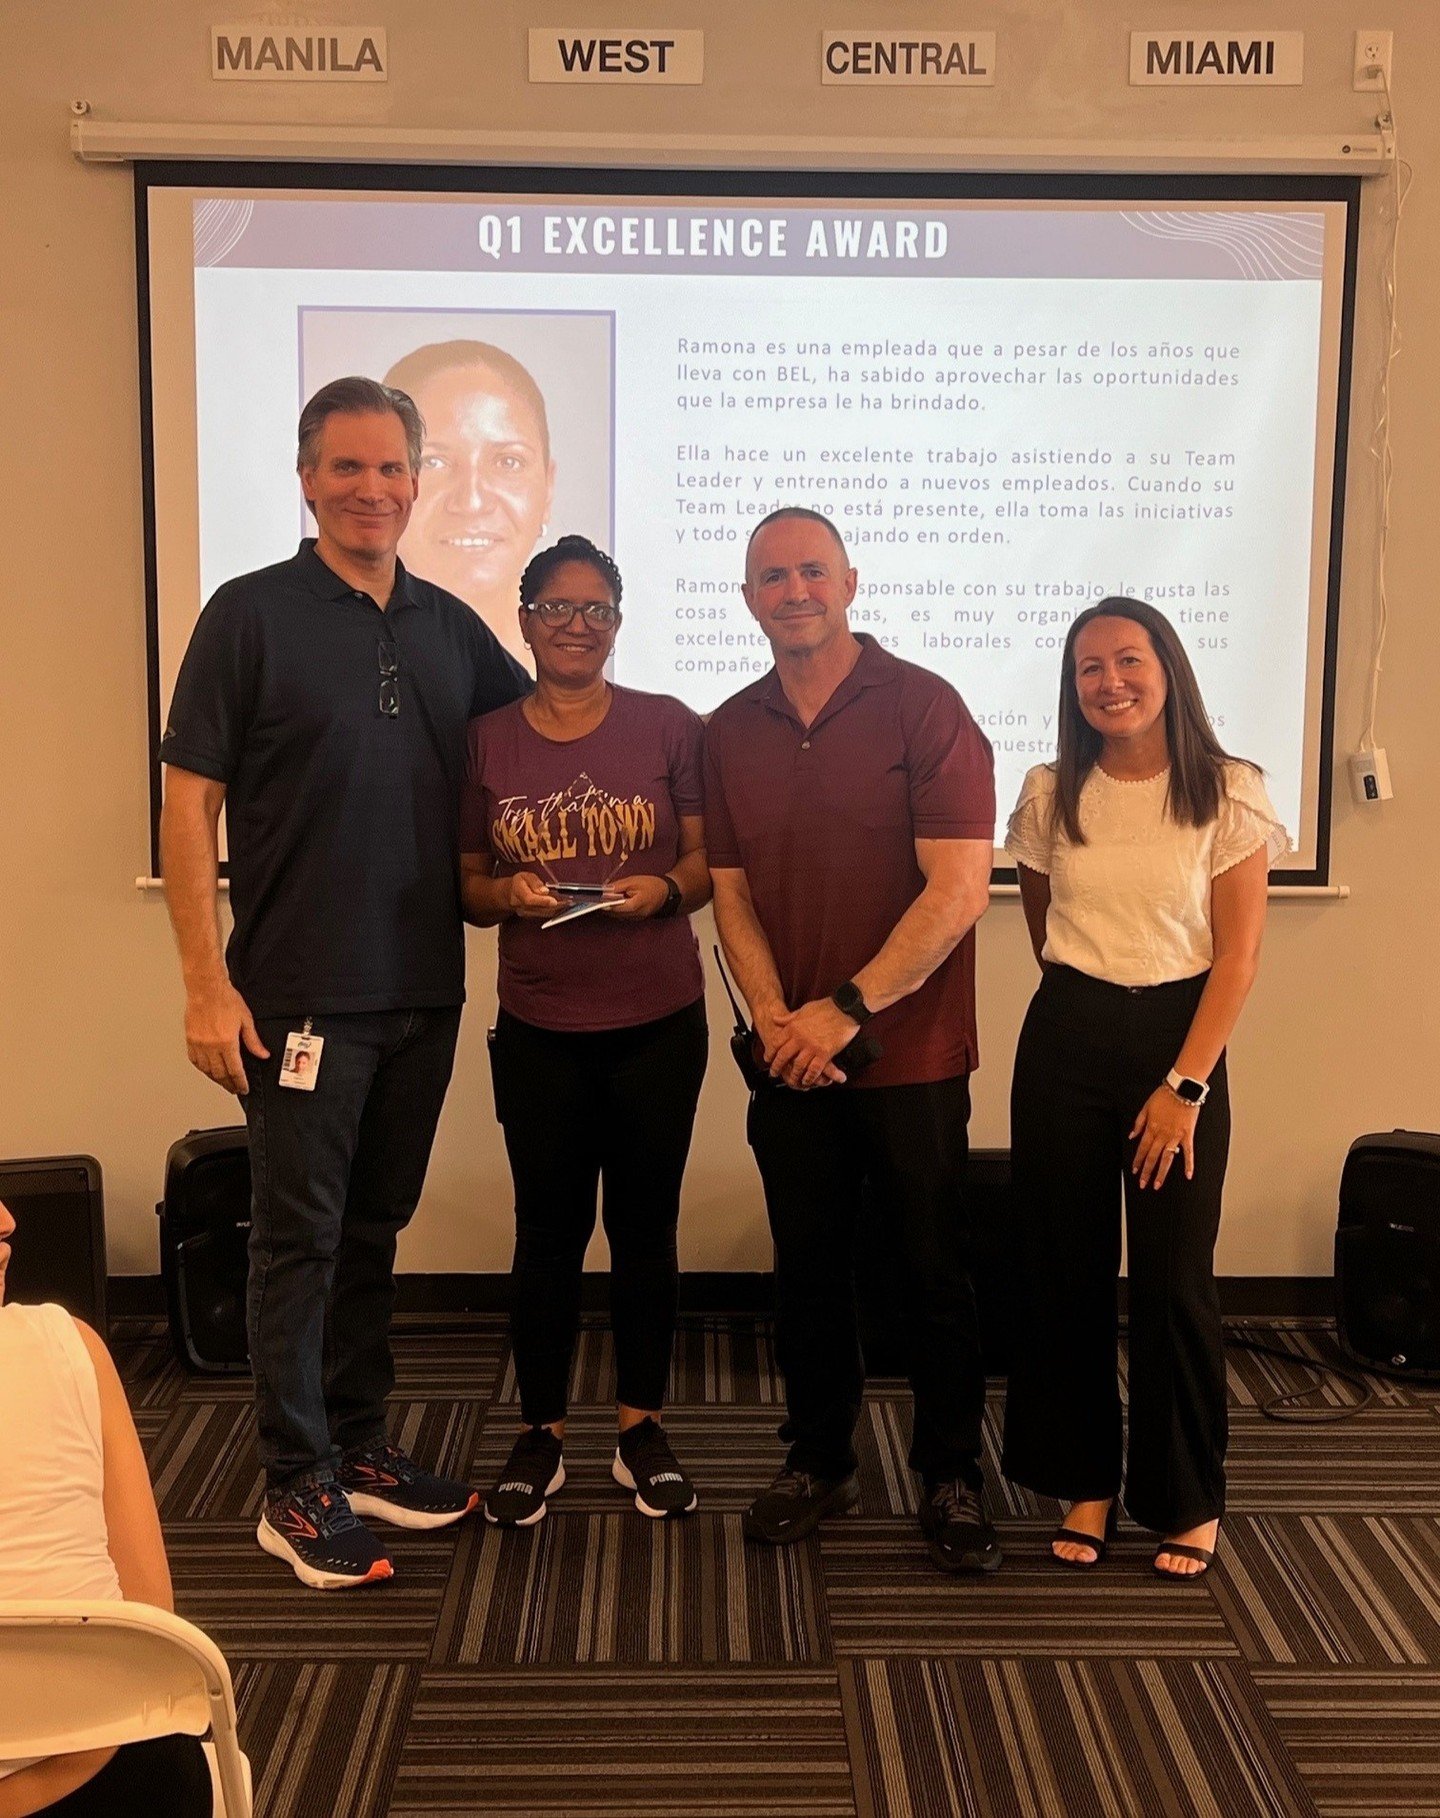 Last week, our Operations Team Town Hall was filled with inspiring moments!

We're thrilled to take a moment to shine a spotlight on our Q1 Excellence Award recipients, whose dedication and hard work truly embody our company's values.

Additionally, 